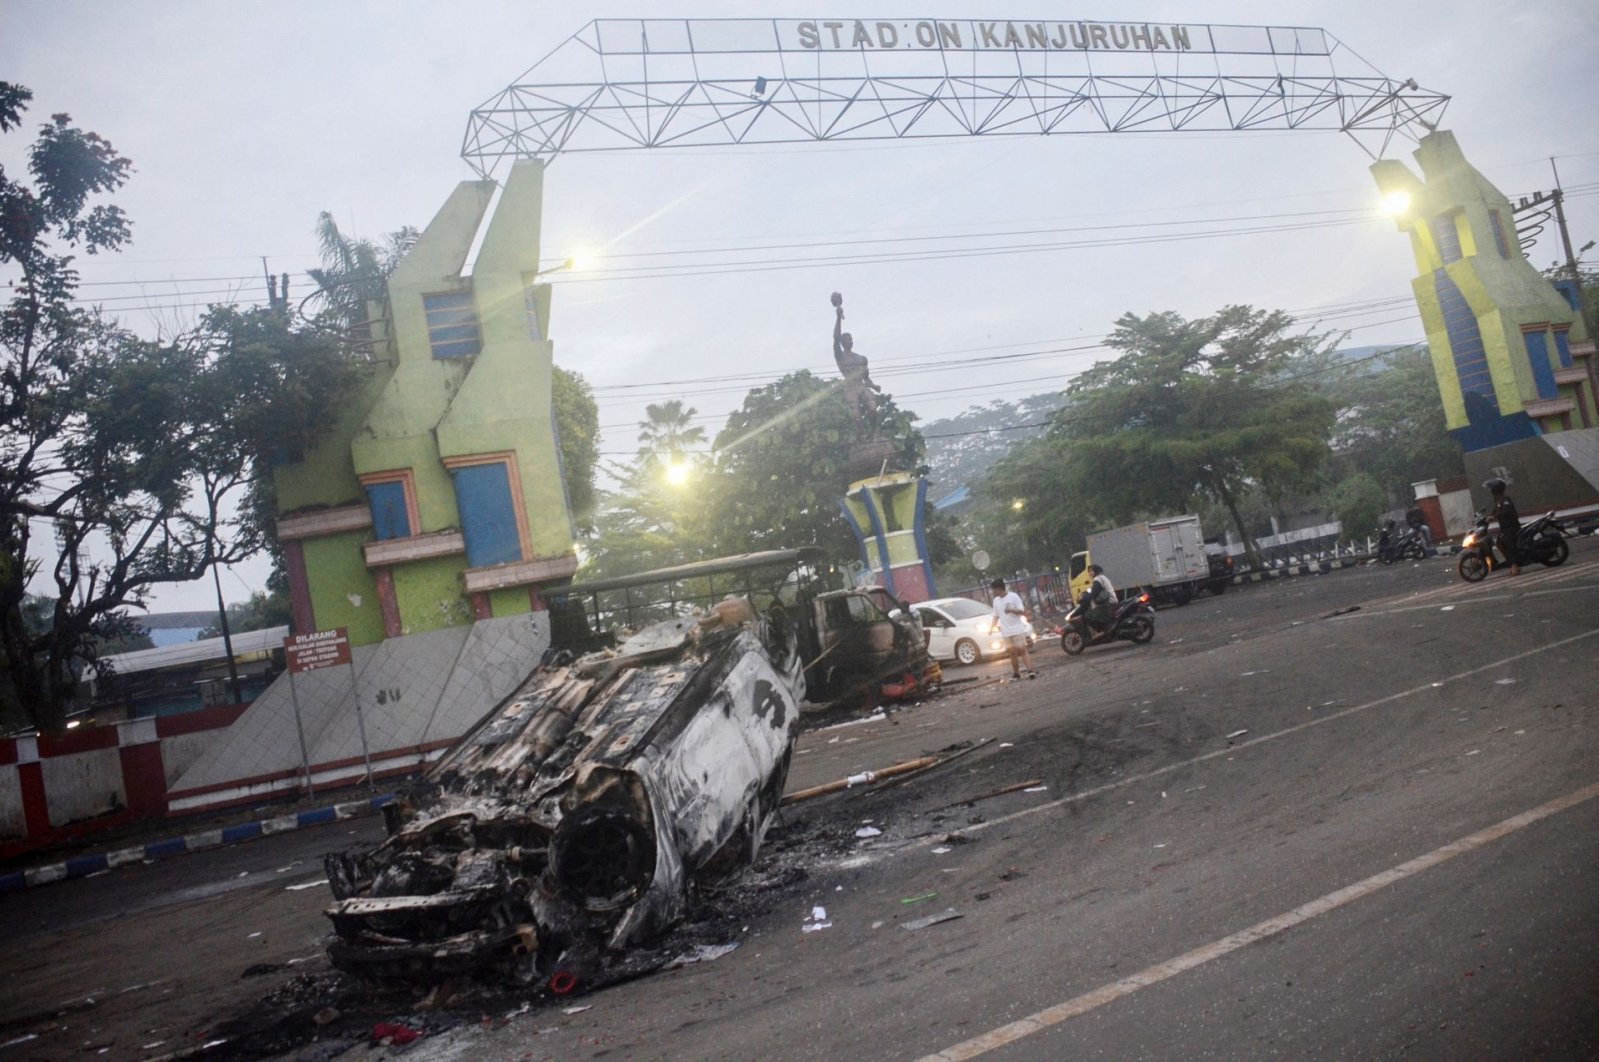 A torched car outside Kanjuruhan stadium in Malang, East Java, Indonesia, Oct. 2, 2022. (AFP Photo)